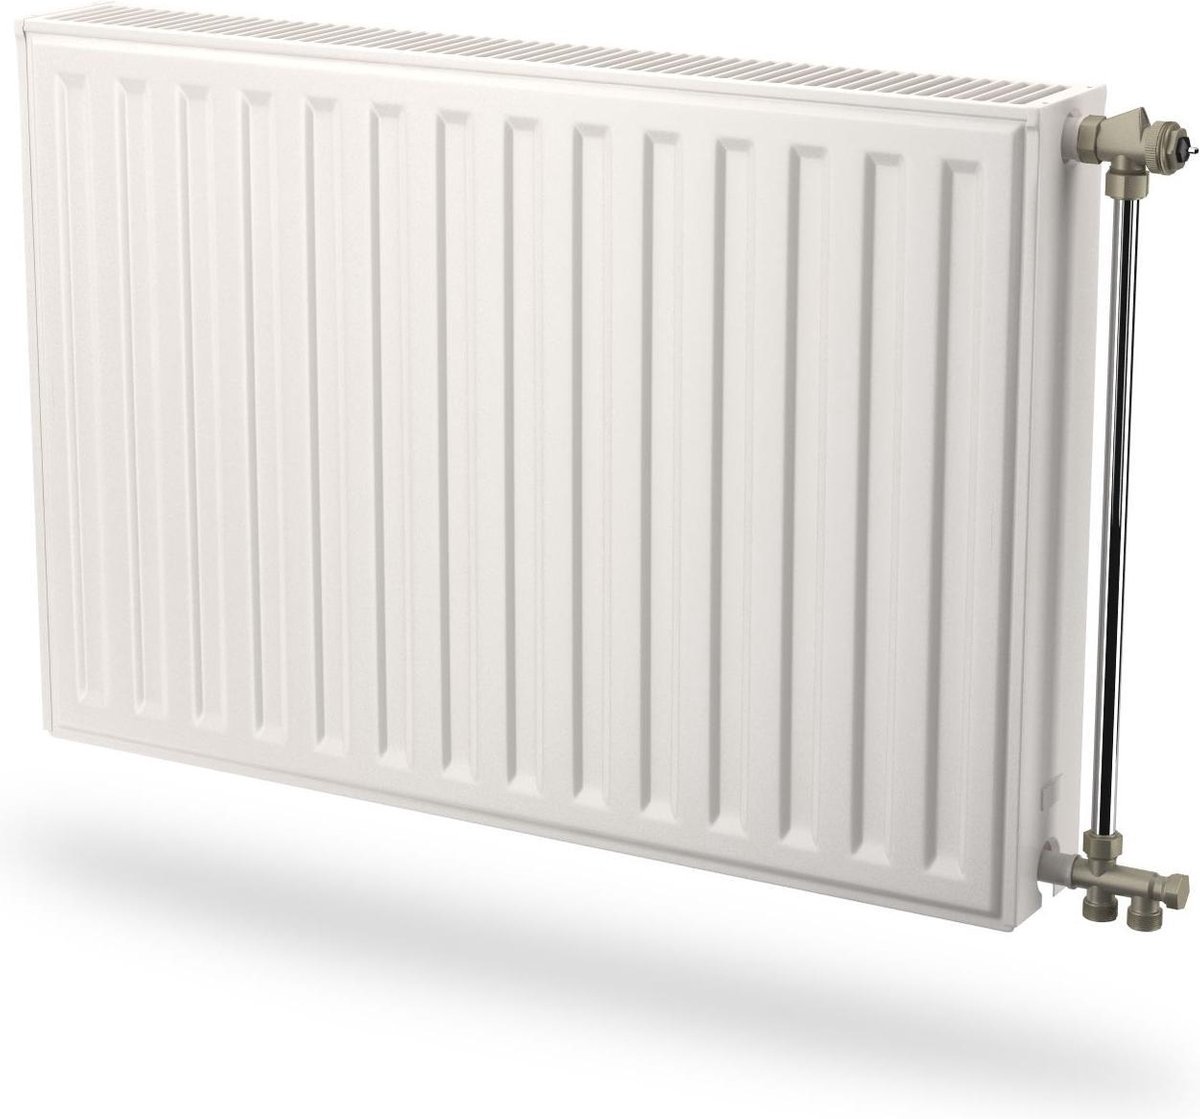 Radson paneelradiator Compact, staal, wit, (hxlxd) 750x450x106mm, 22